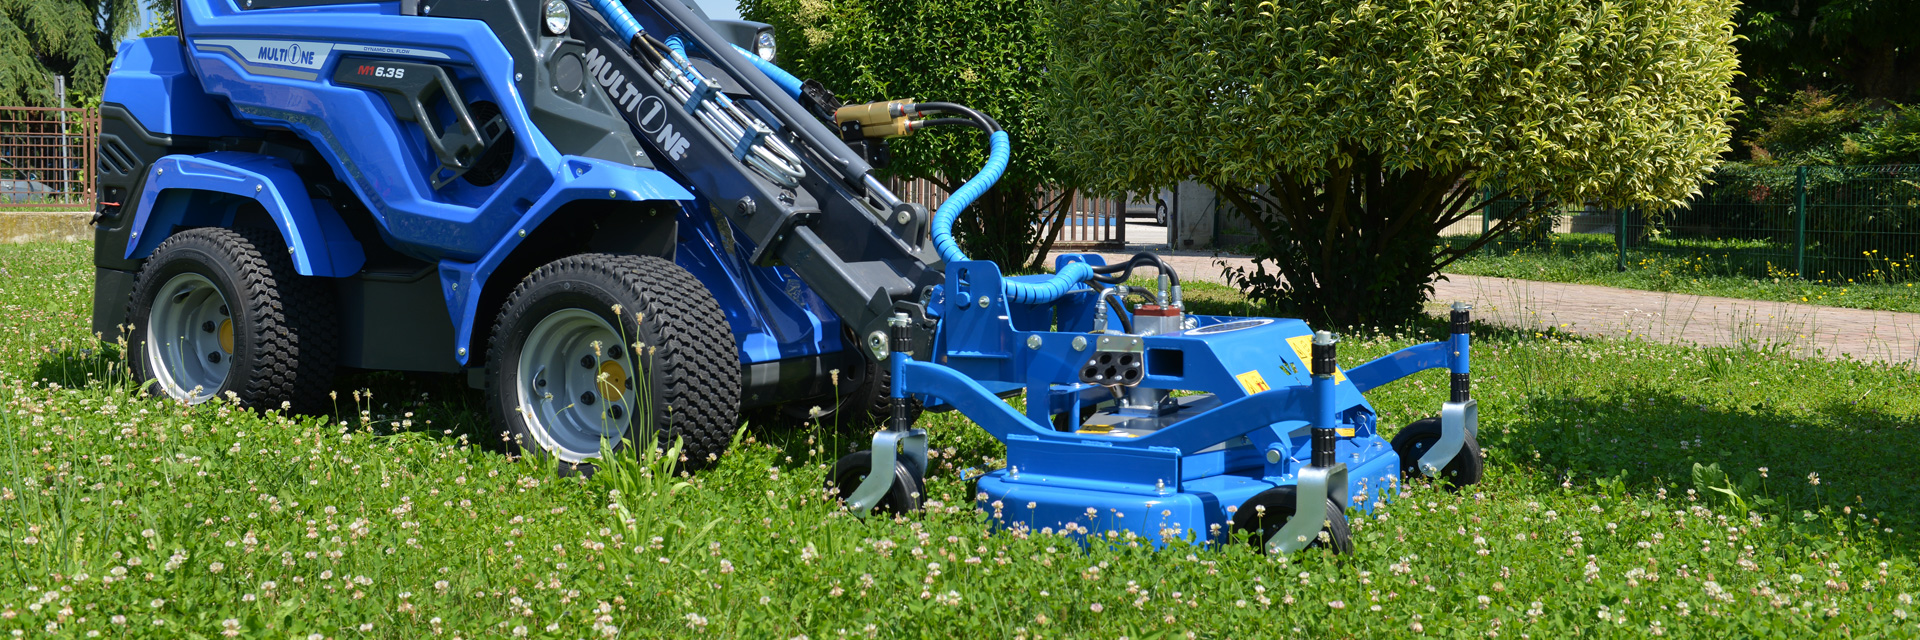 lawn-mower for mini loader